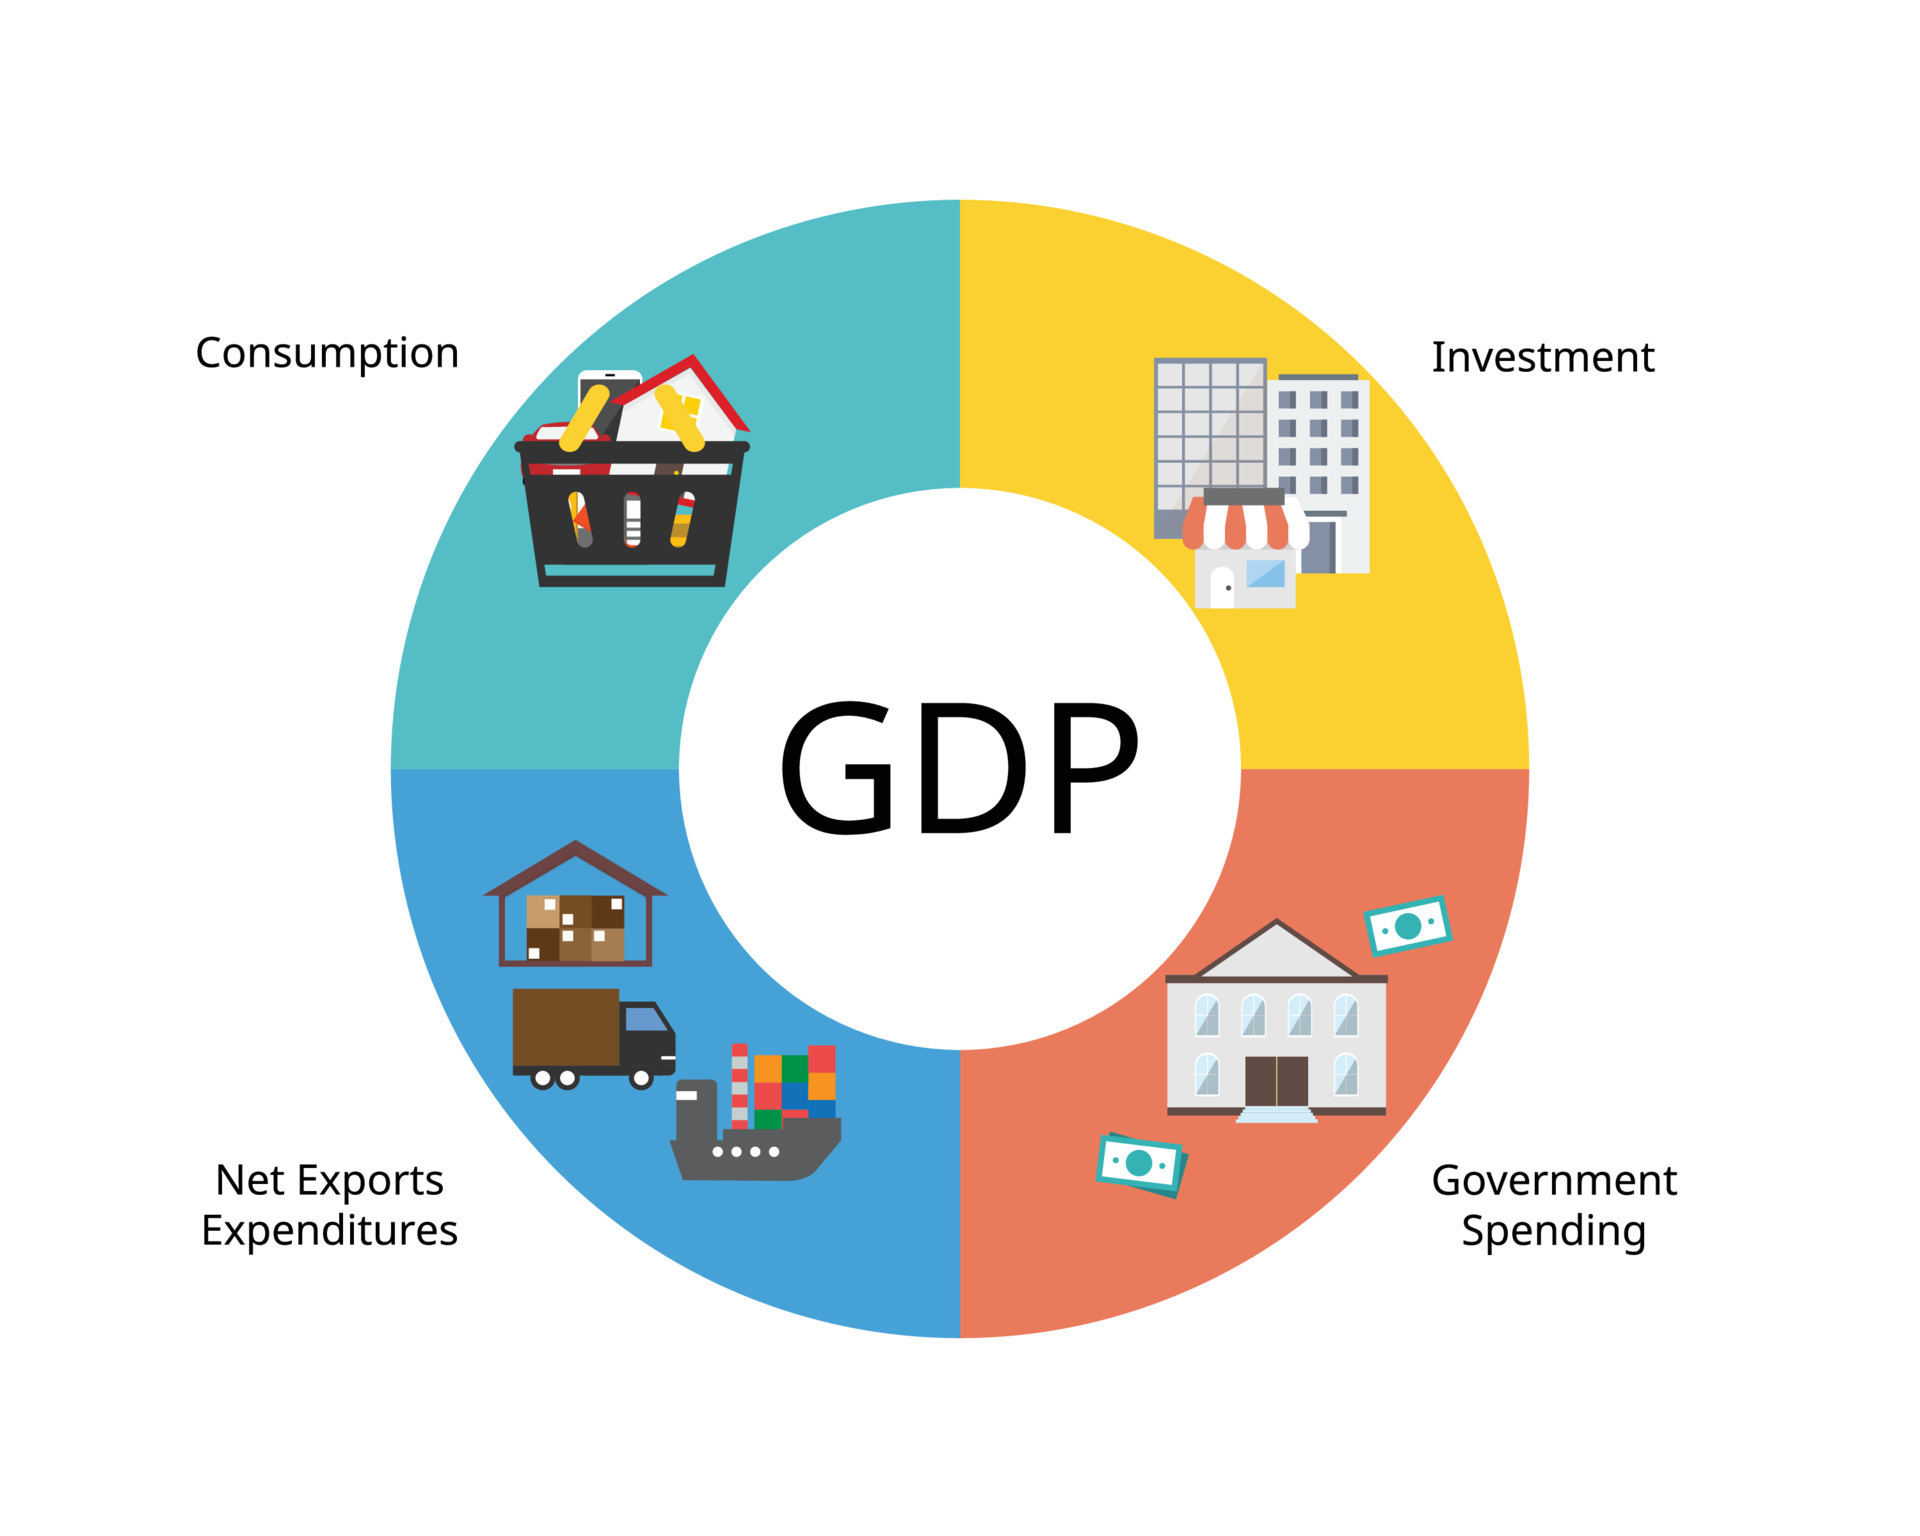 Gross domestic product. Gross domestic product consumption. Net Export. GDP what does it Stand for.